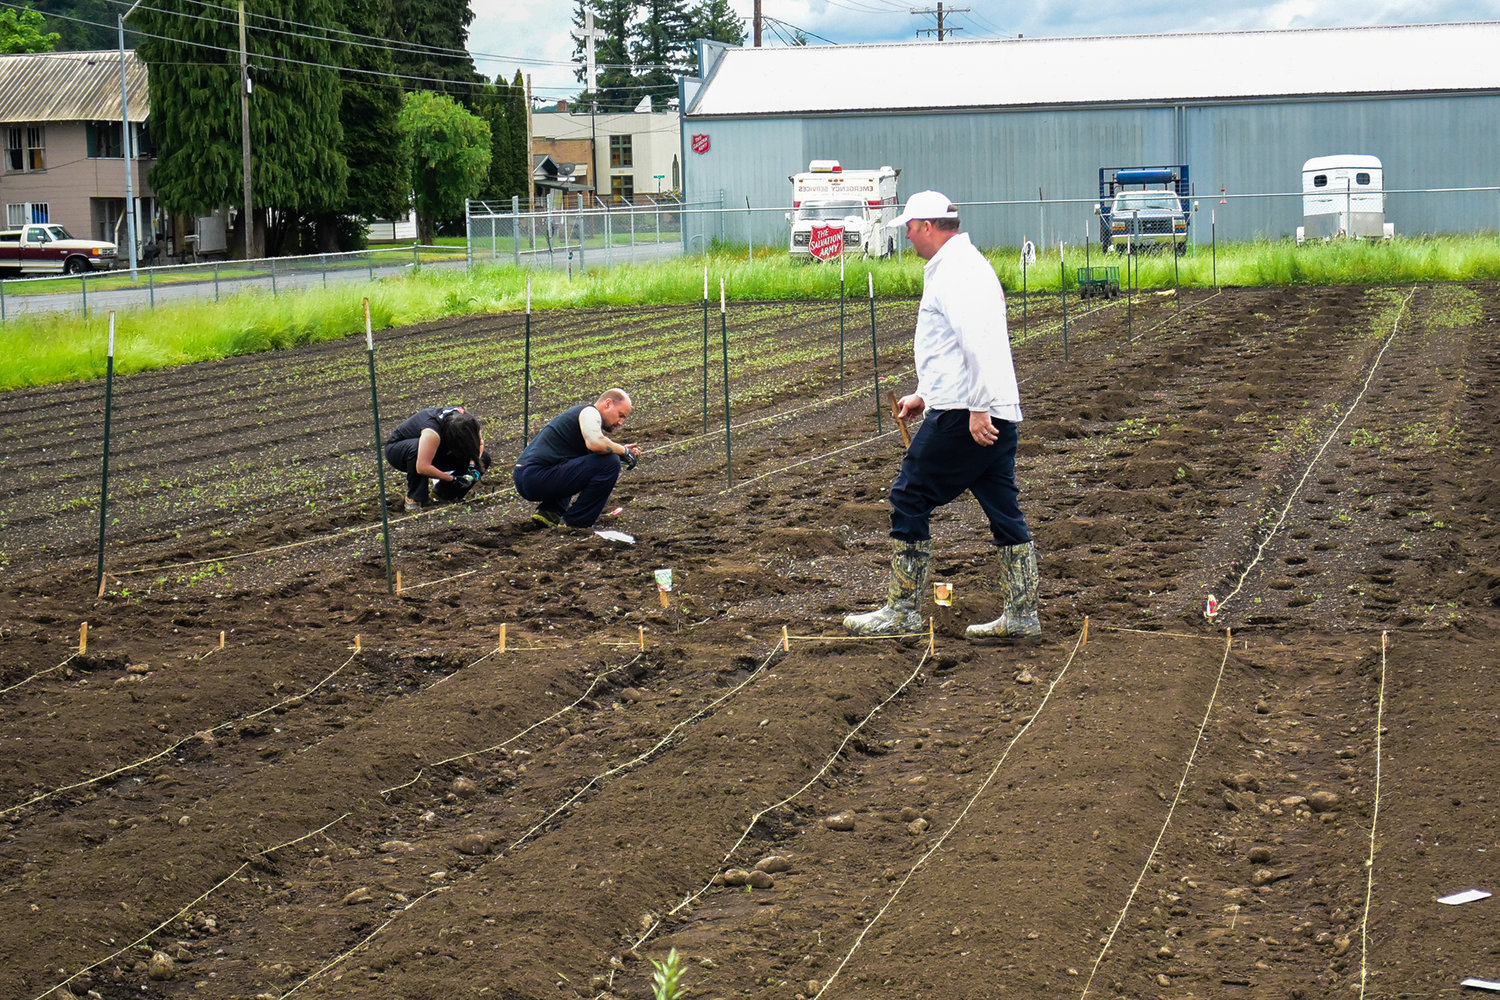 Volunteers work in the community garden at the Salvation Army in Centralia.